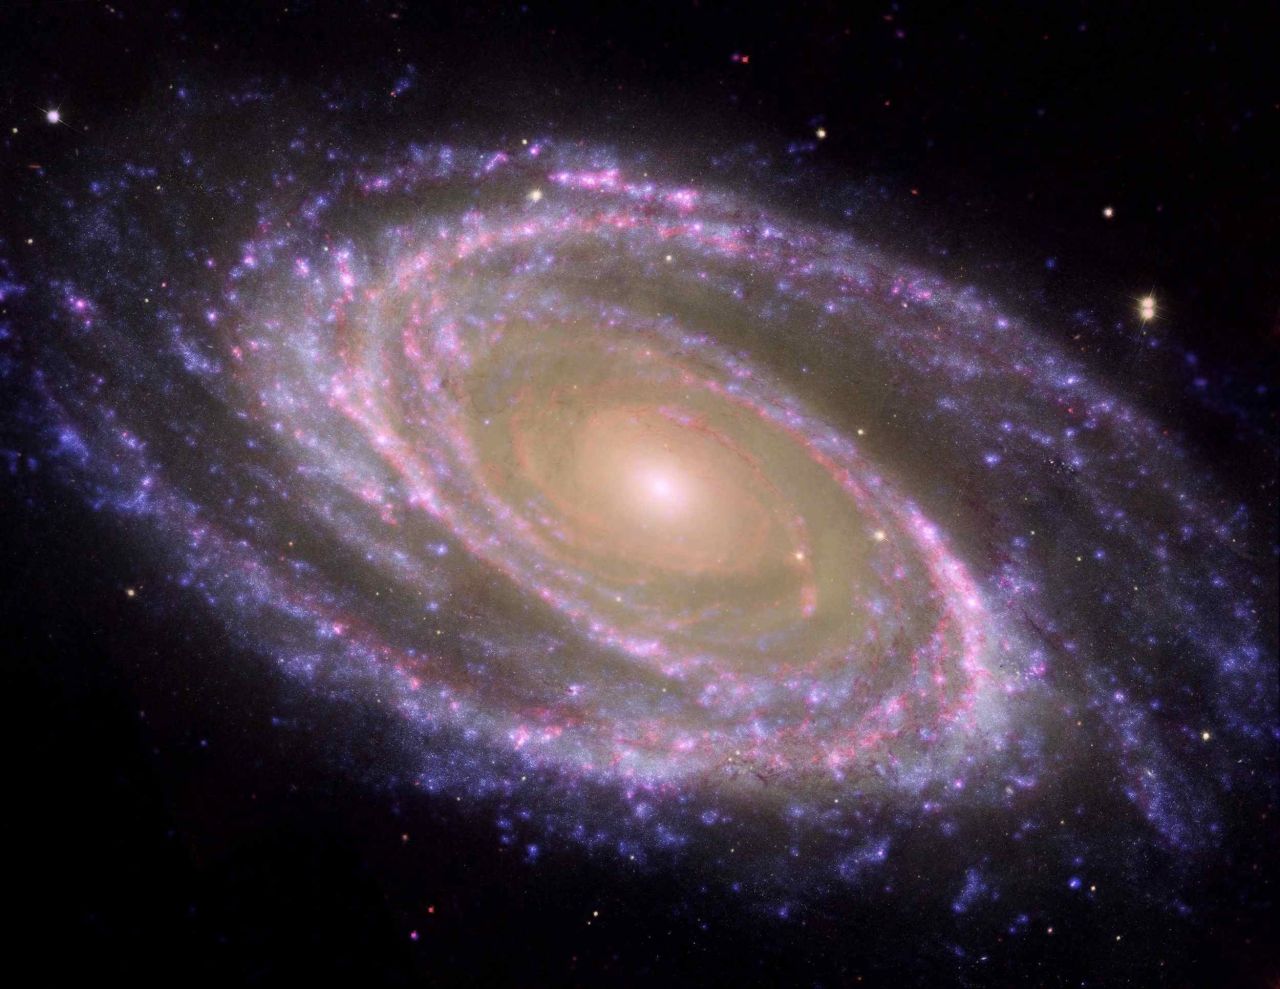 The dreamy spiral galaxy M81 is presented in crisp detail thanks to a collaboration between Spitzer, Hubble and NASA's Galaxy Evolution Explorer. 